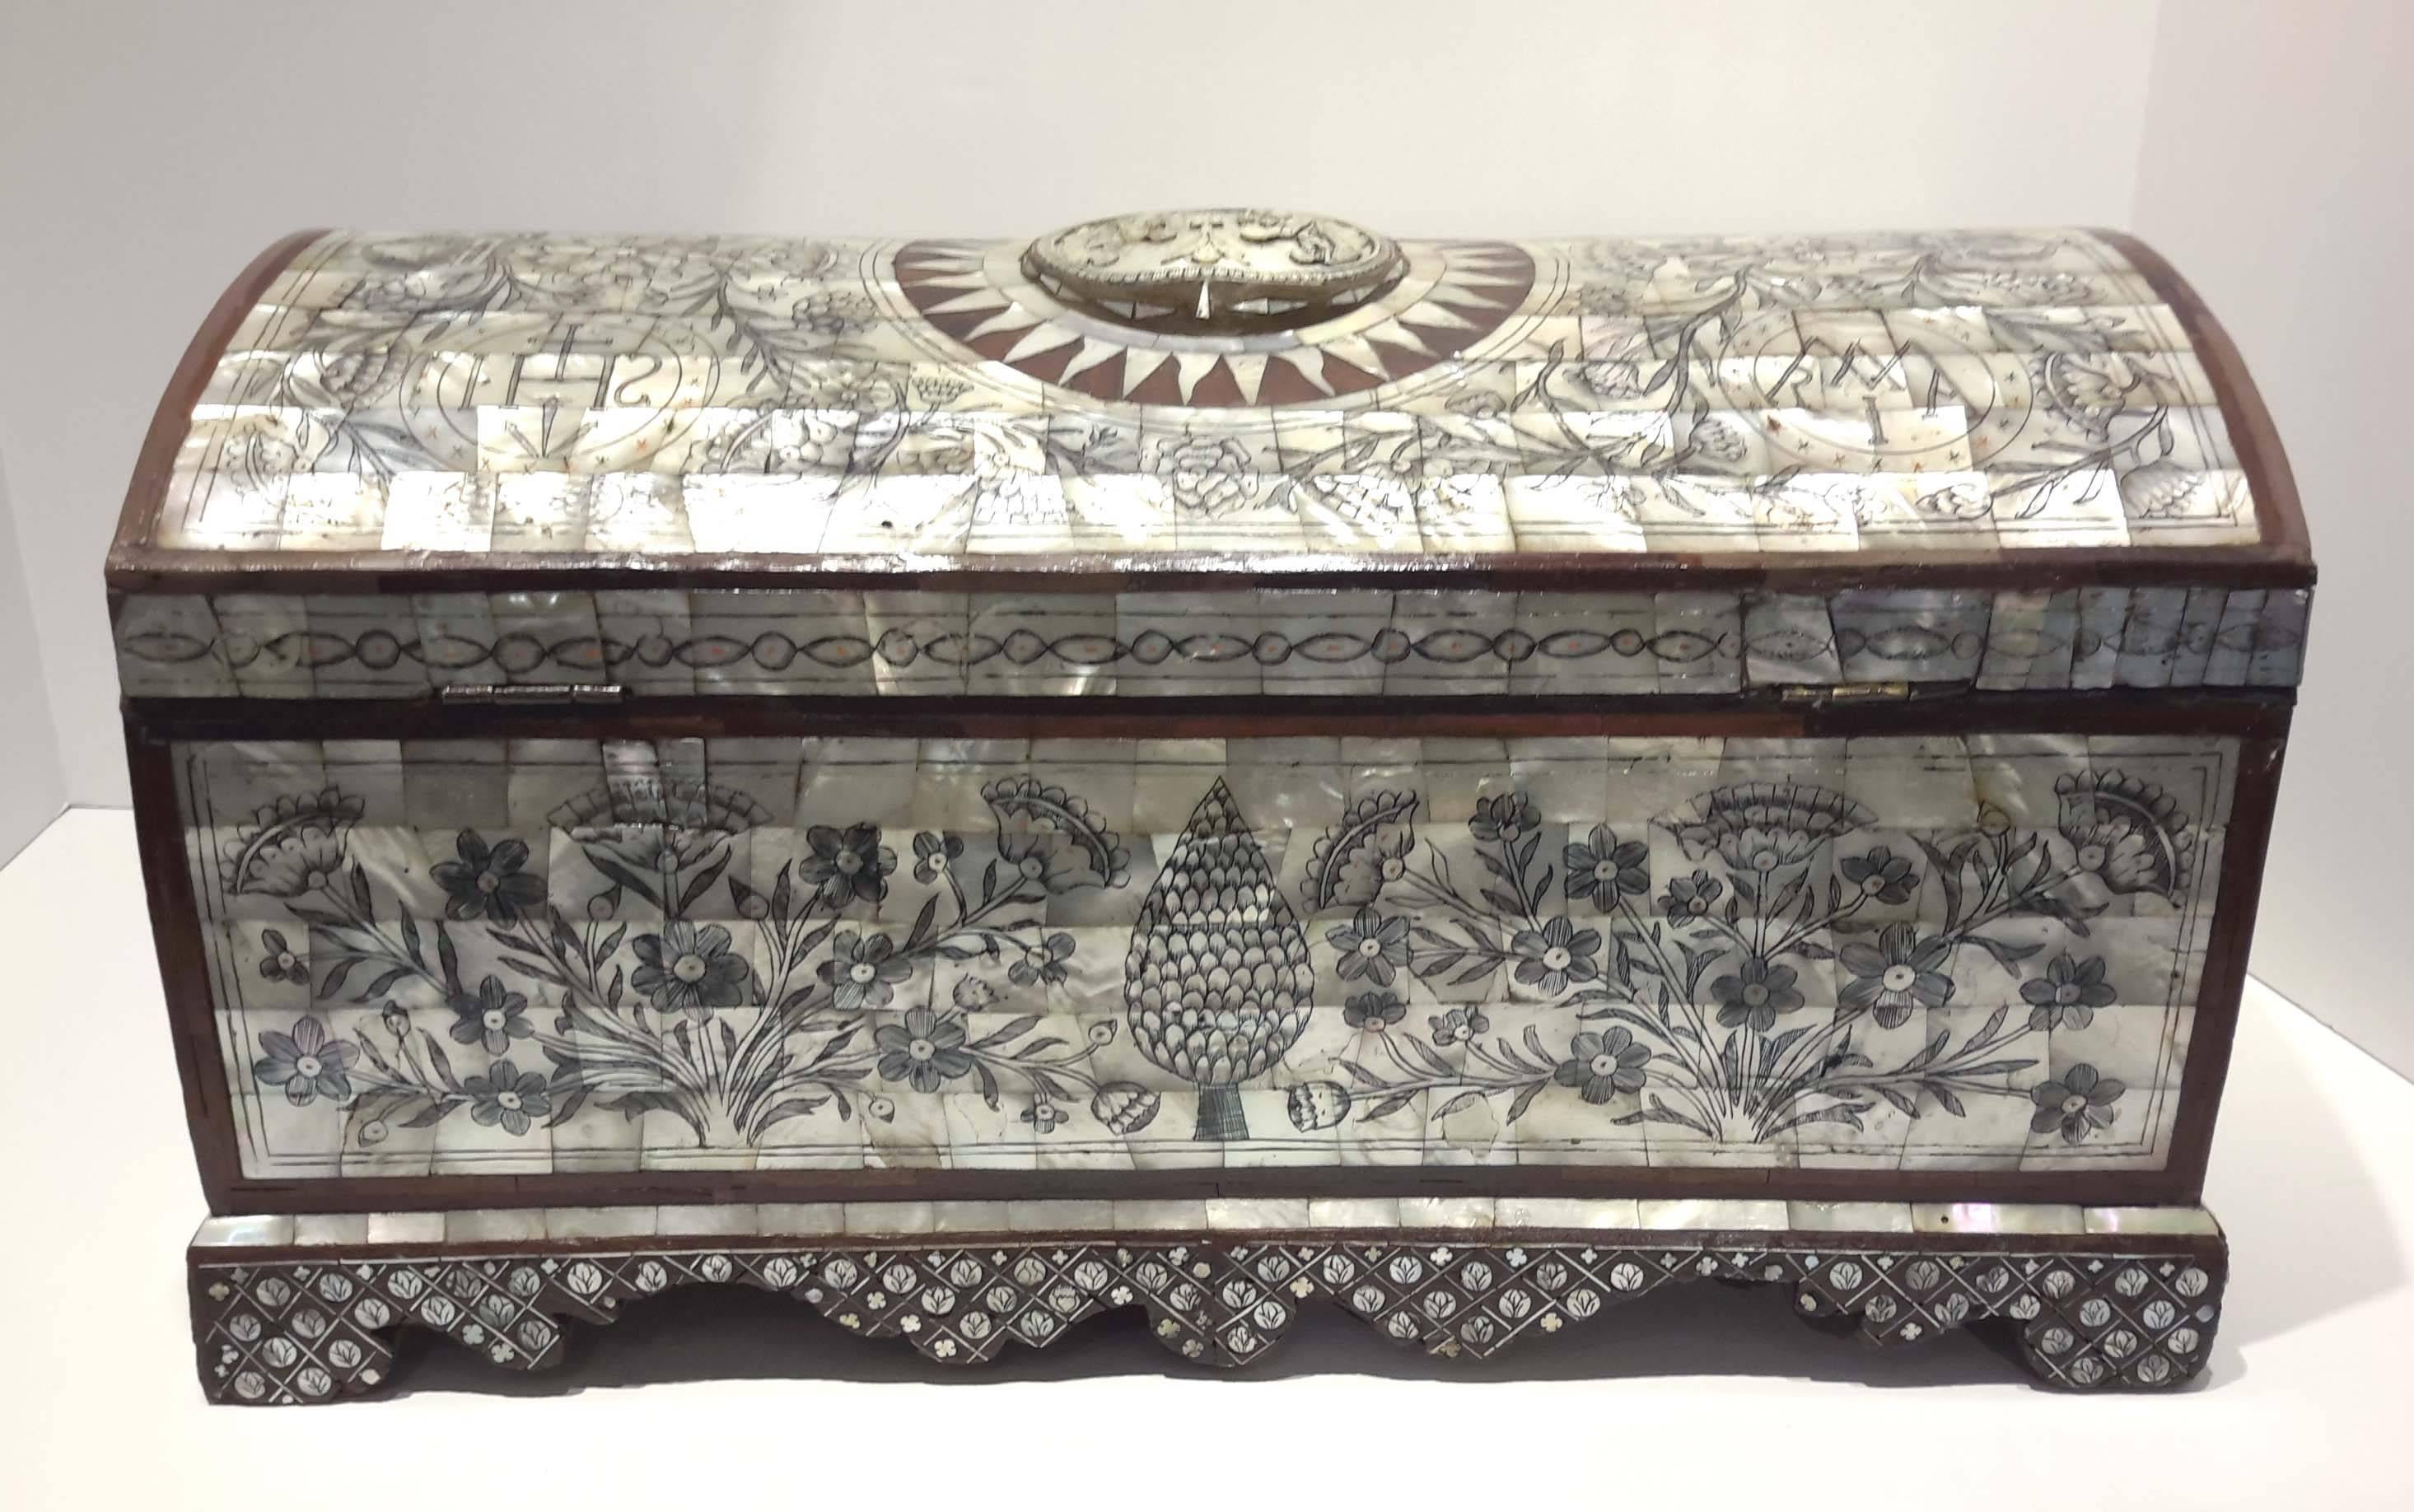 A very rare 18th century Jerusalem Bible chest or Reliquary chest, the mother-of-pearl veneer highly decorated with various Biblical scenes, all set on an olivewood, the interior is lined with antique silk. Some professional restoration to the box.